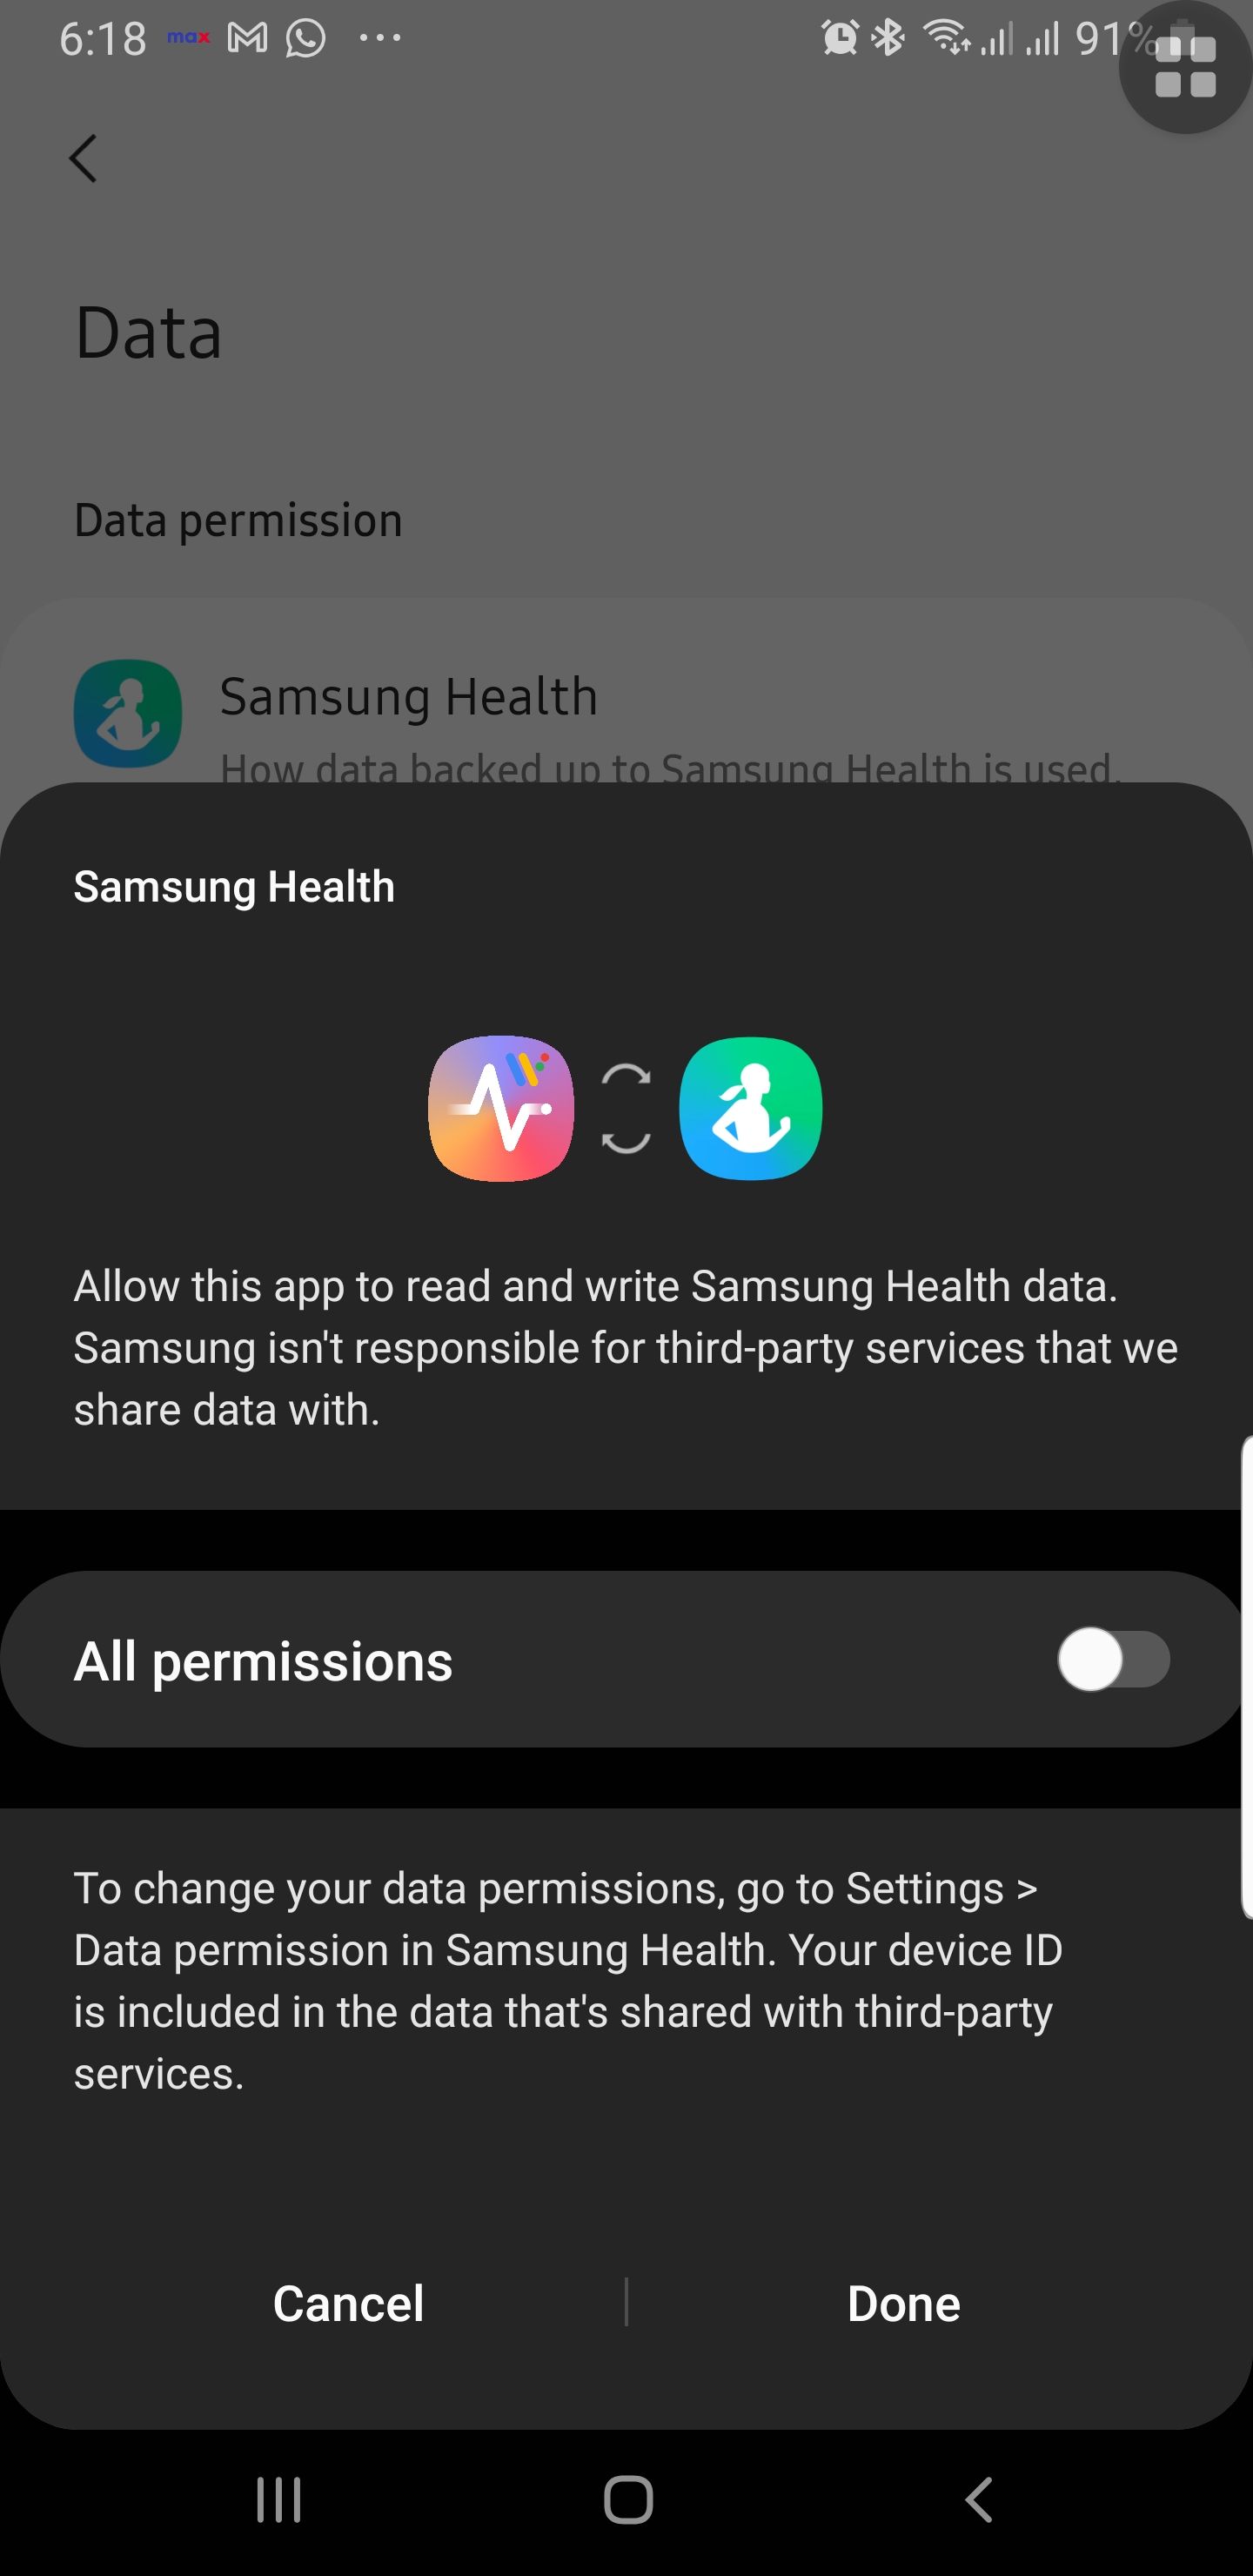 How to sync health data from Samsung Health to HealthifyMe - Quora